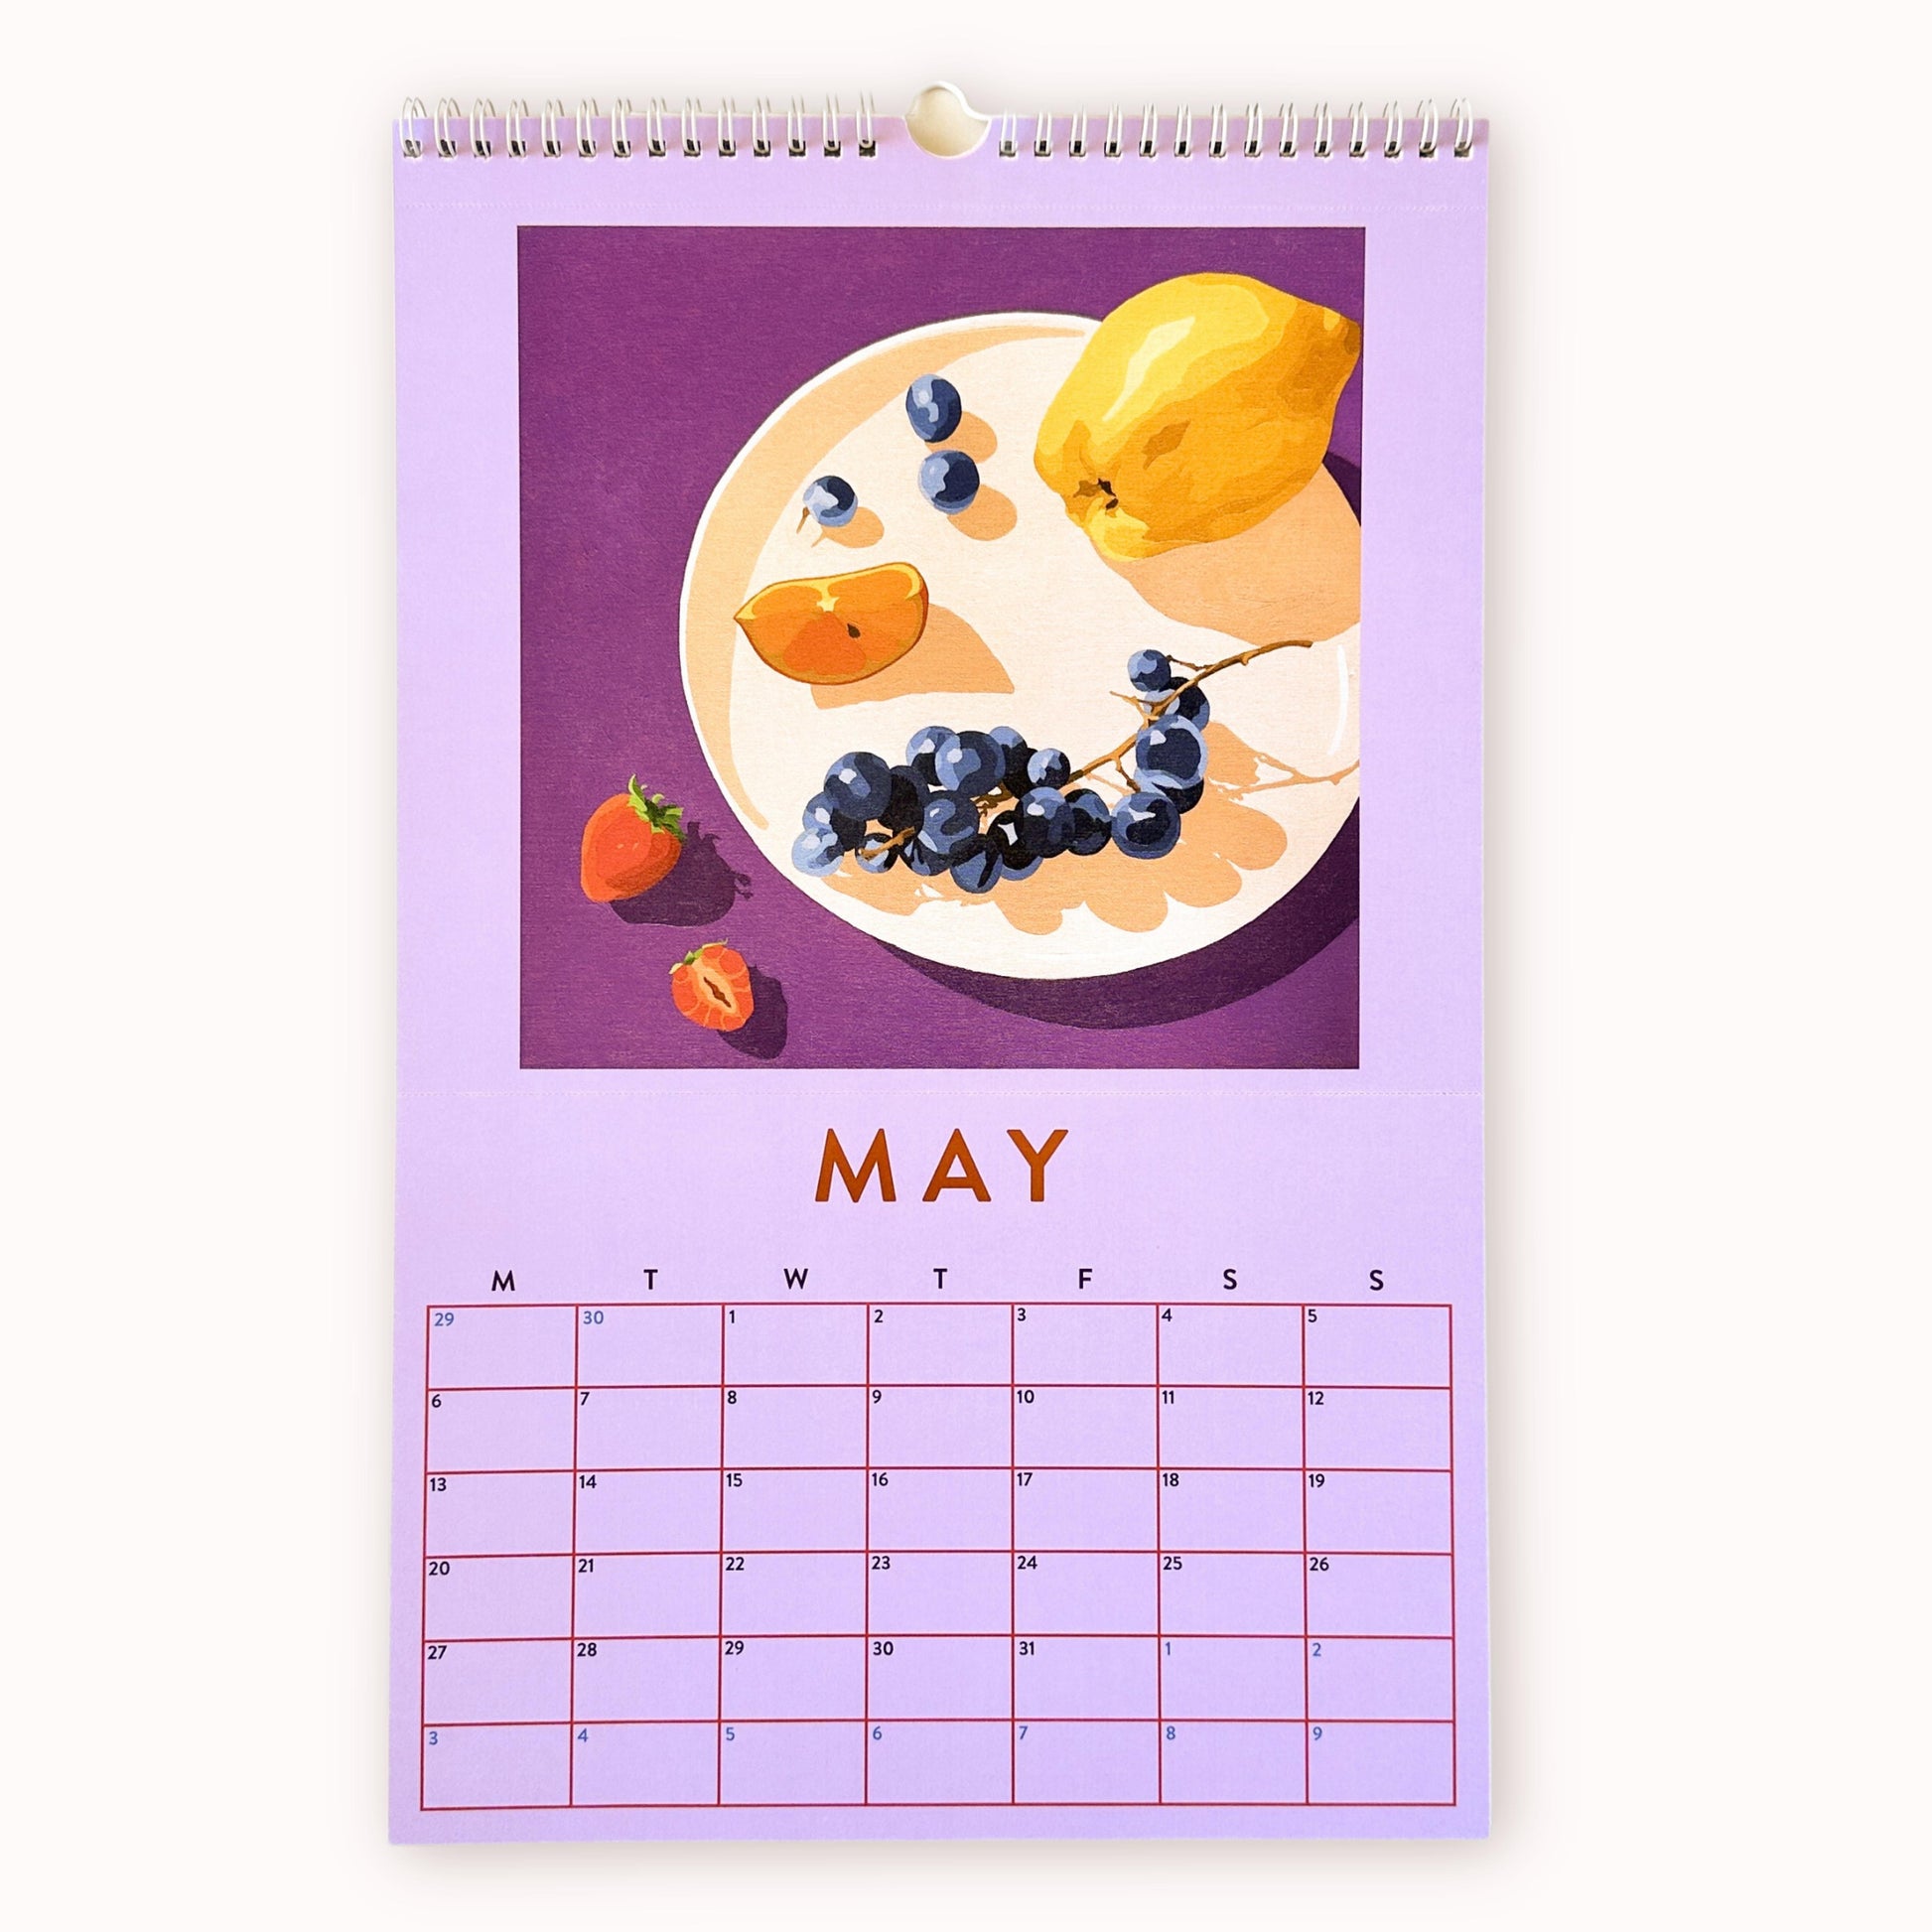 2024 art wall calendar in A3 size for the month of May, featuring a still life oil painting of fruits such as a quince, grapes, orange slice and strawberries, on a cream plate on a magenta background